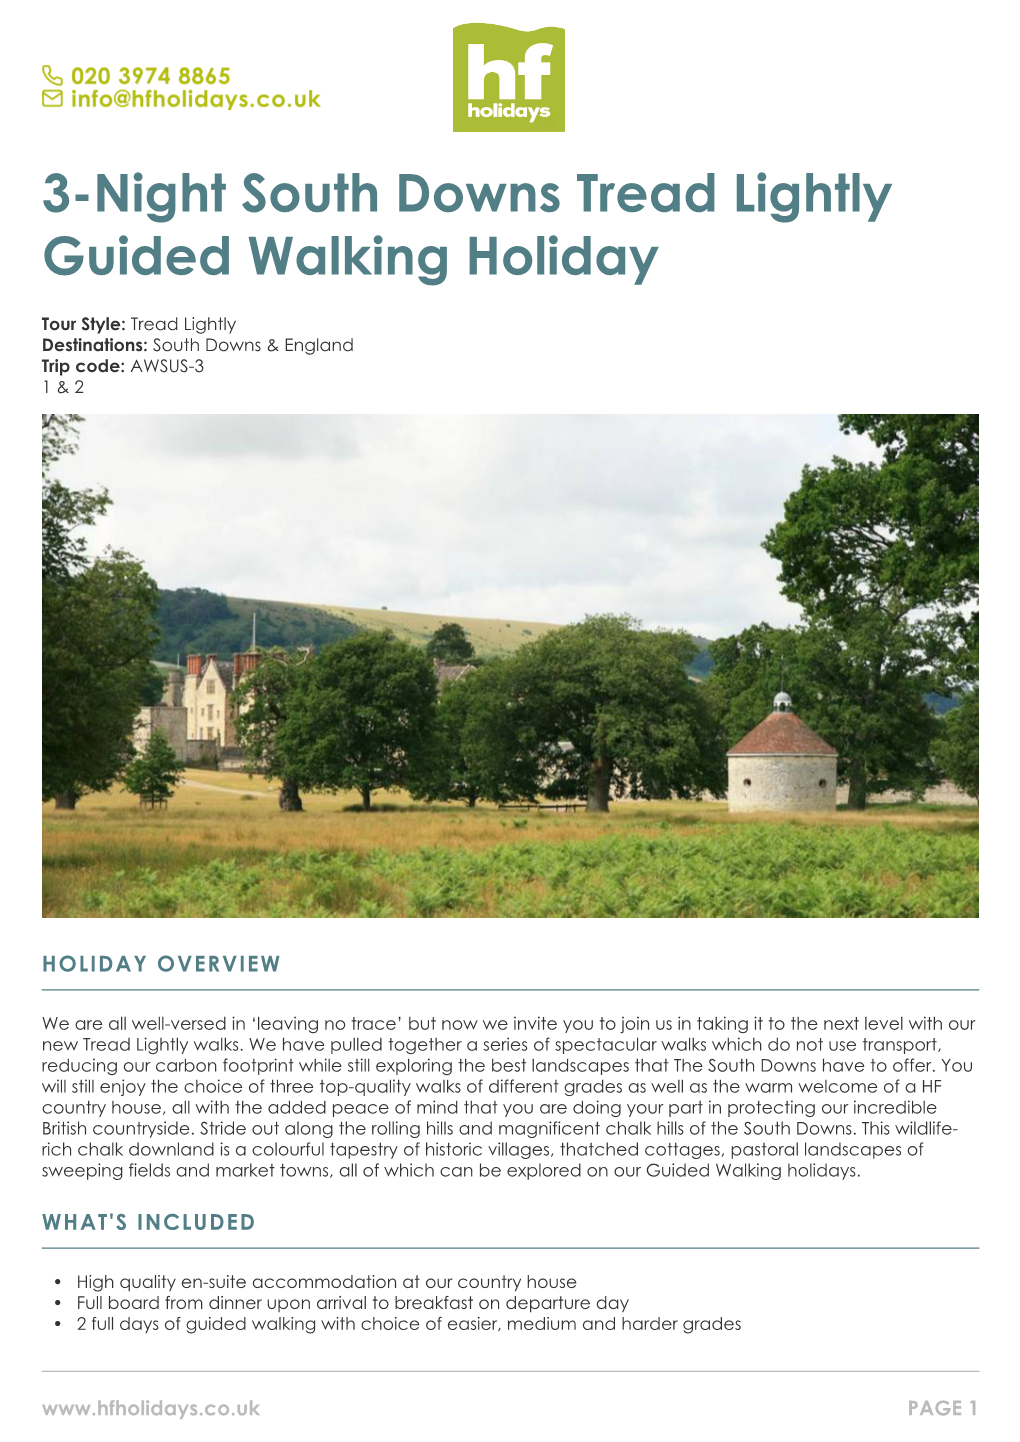 3-Night South Downs Tread Lightly Guided Walking Holiday